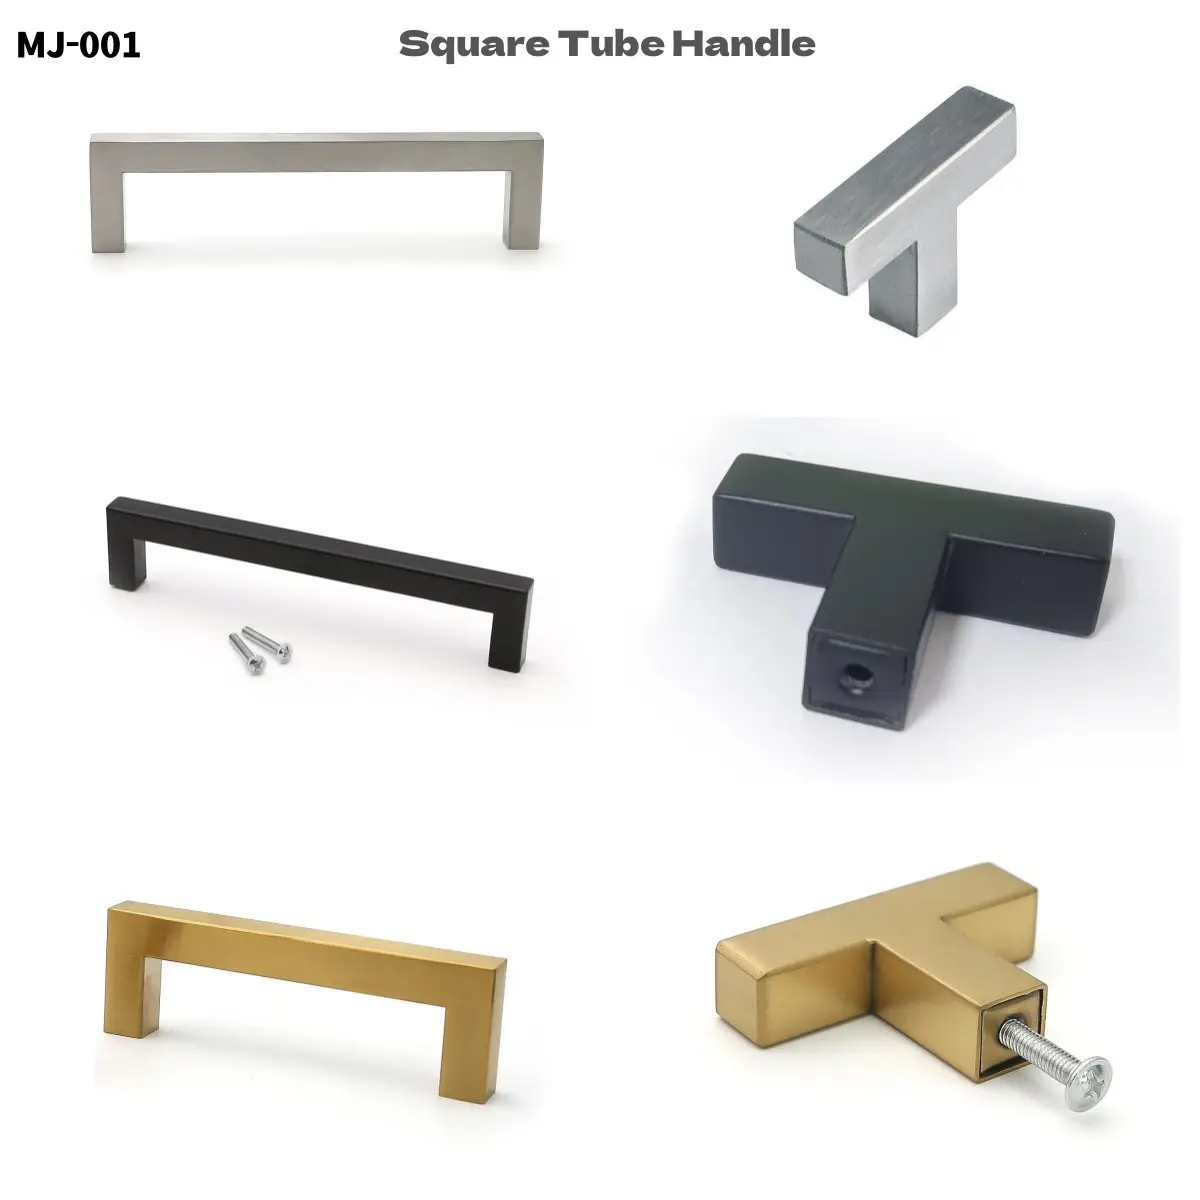 Hollow Gold Square Stainless Steel Kitchen Handle Drawer Pull Black Cabinet Handles and Pulls For Furniture